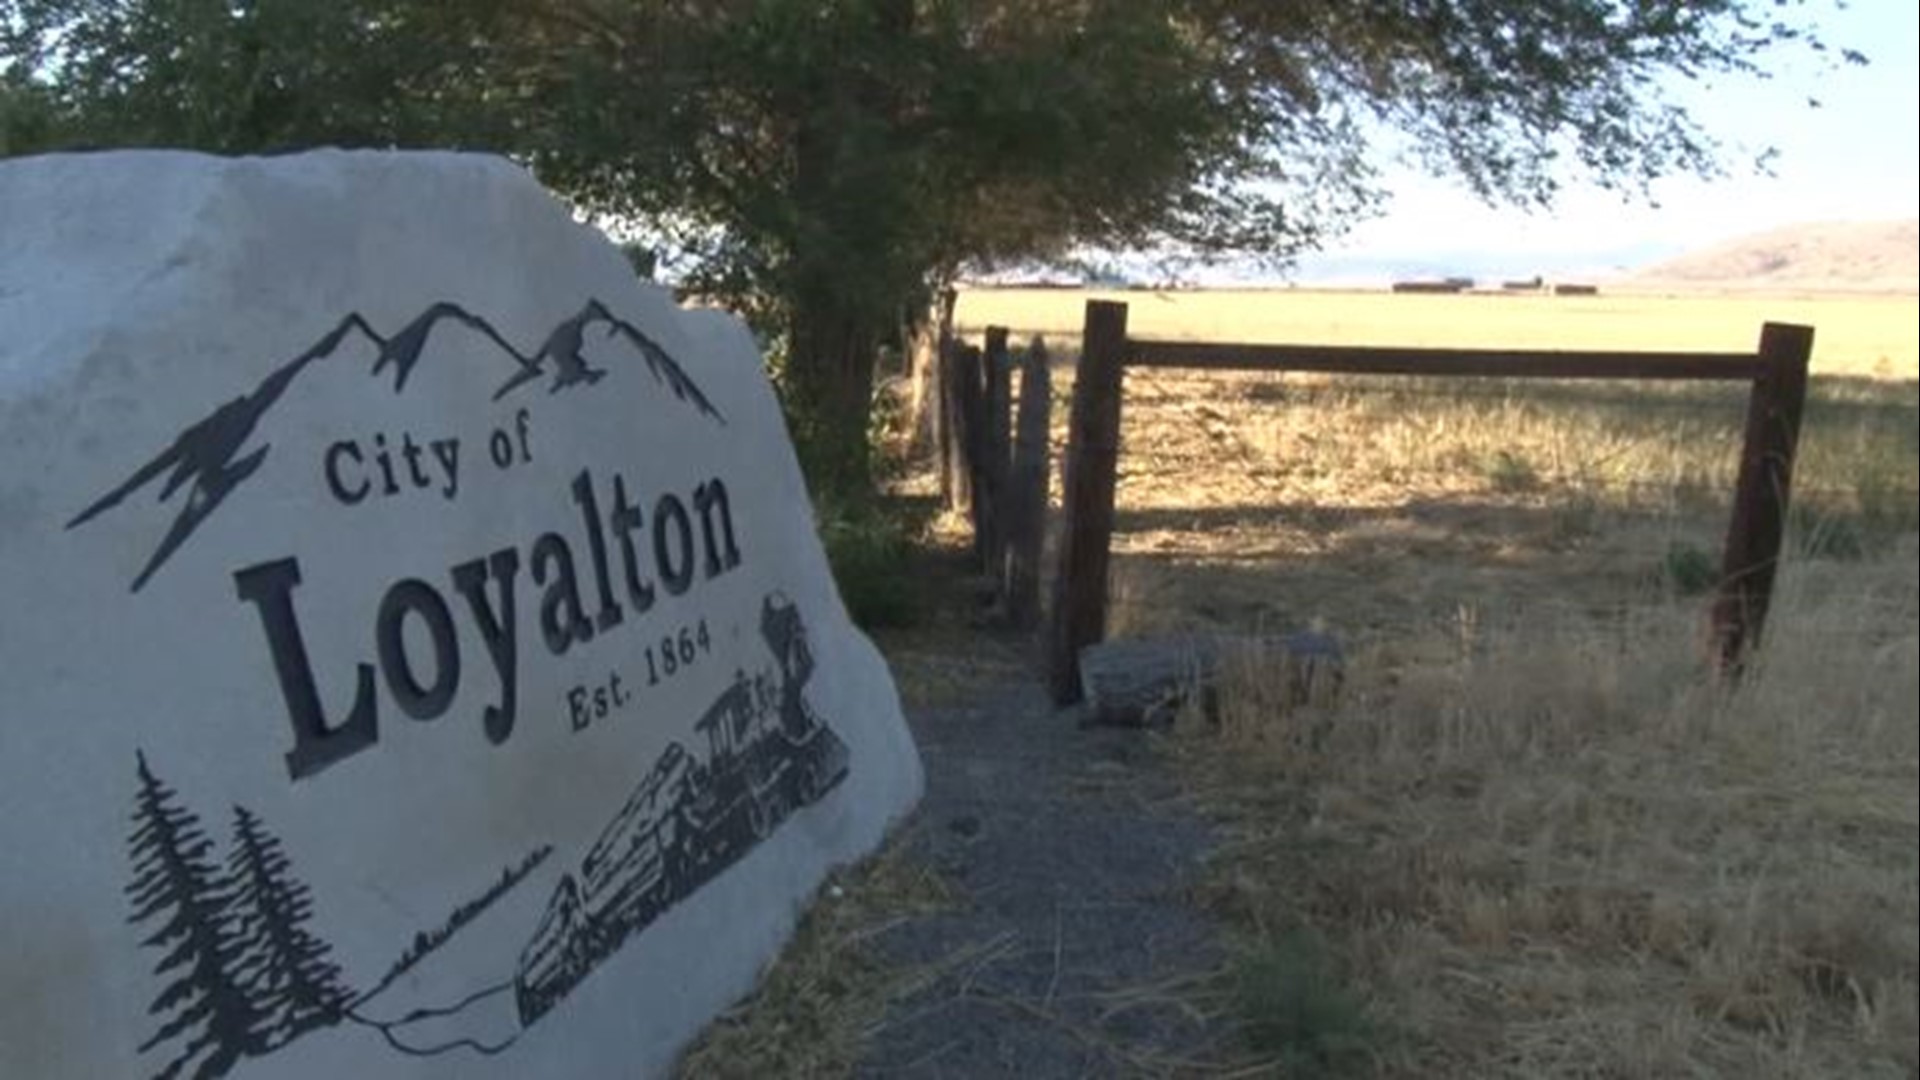 It may be really remote, but there's something special about Loyalton, especially when it comes to sandwiches.